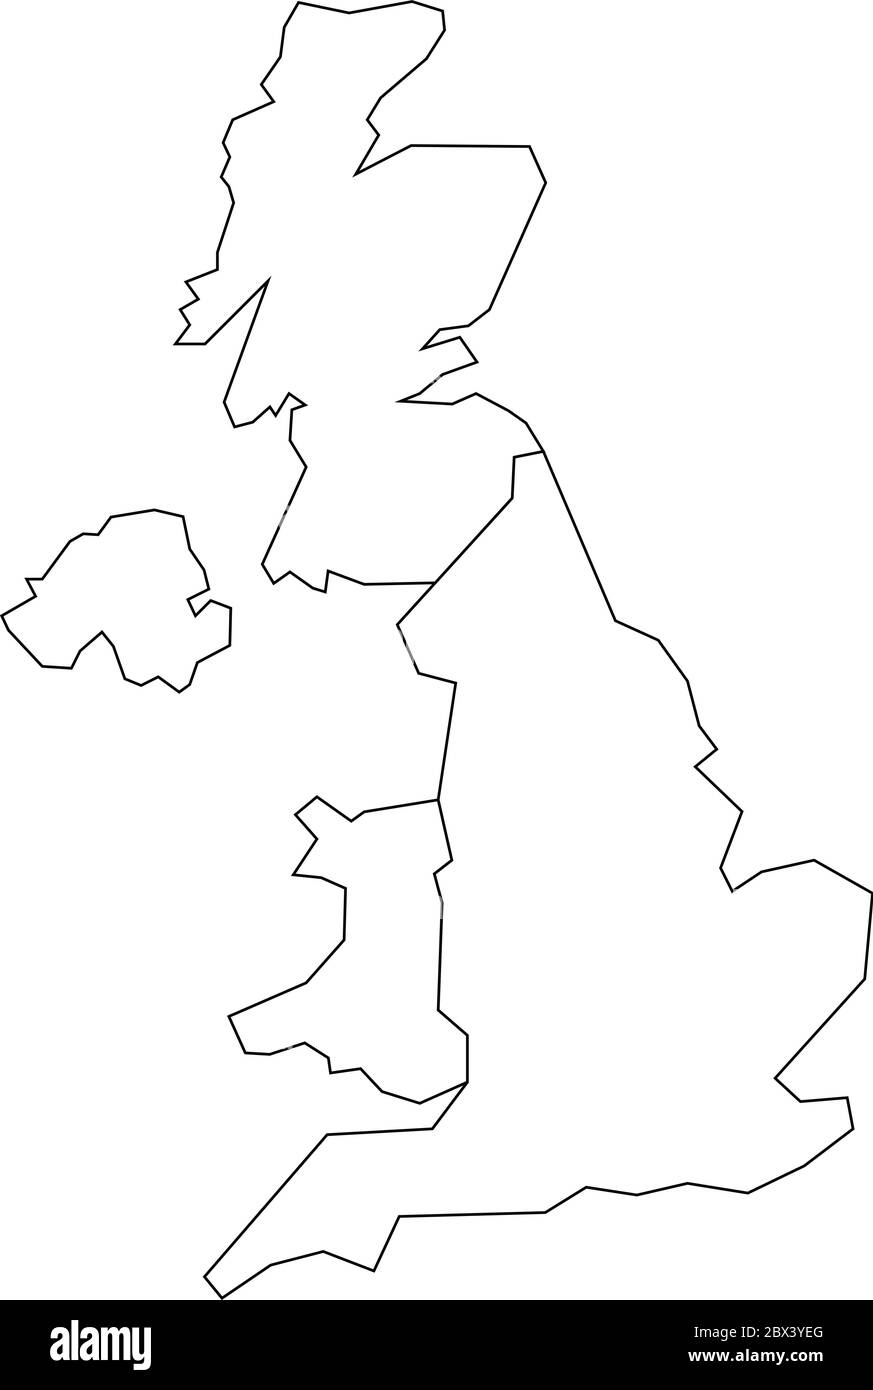 Map of United Kingdom countries - England, Wales, Scotland and Northern Ireland. Simple flat vector outline map. Stock Vector